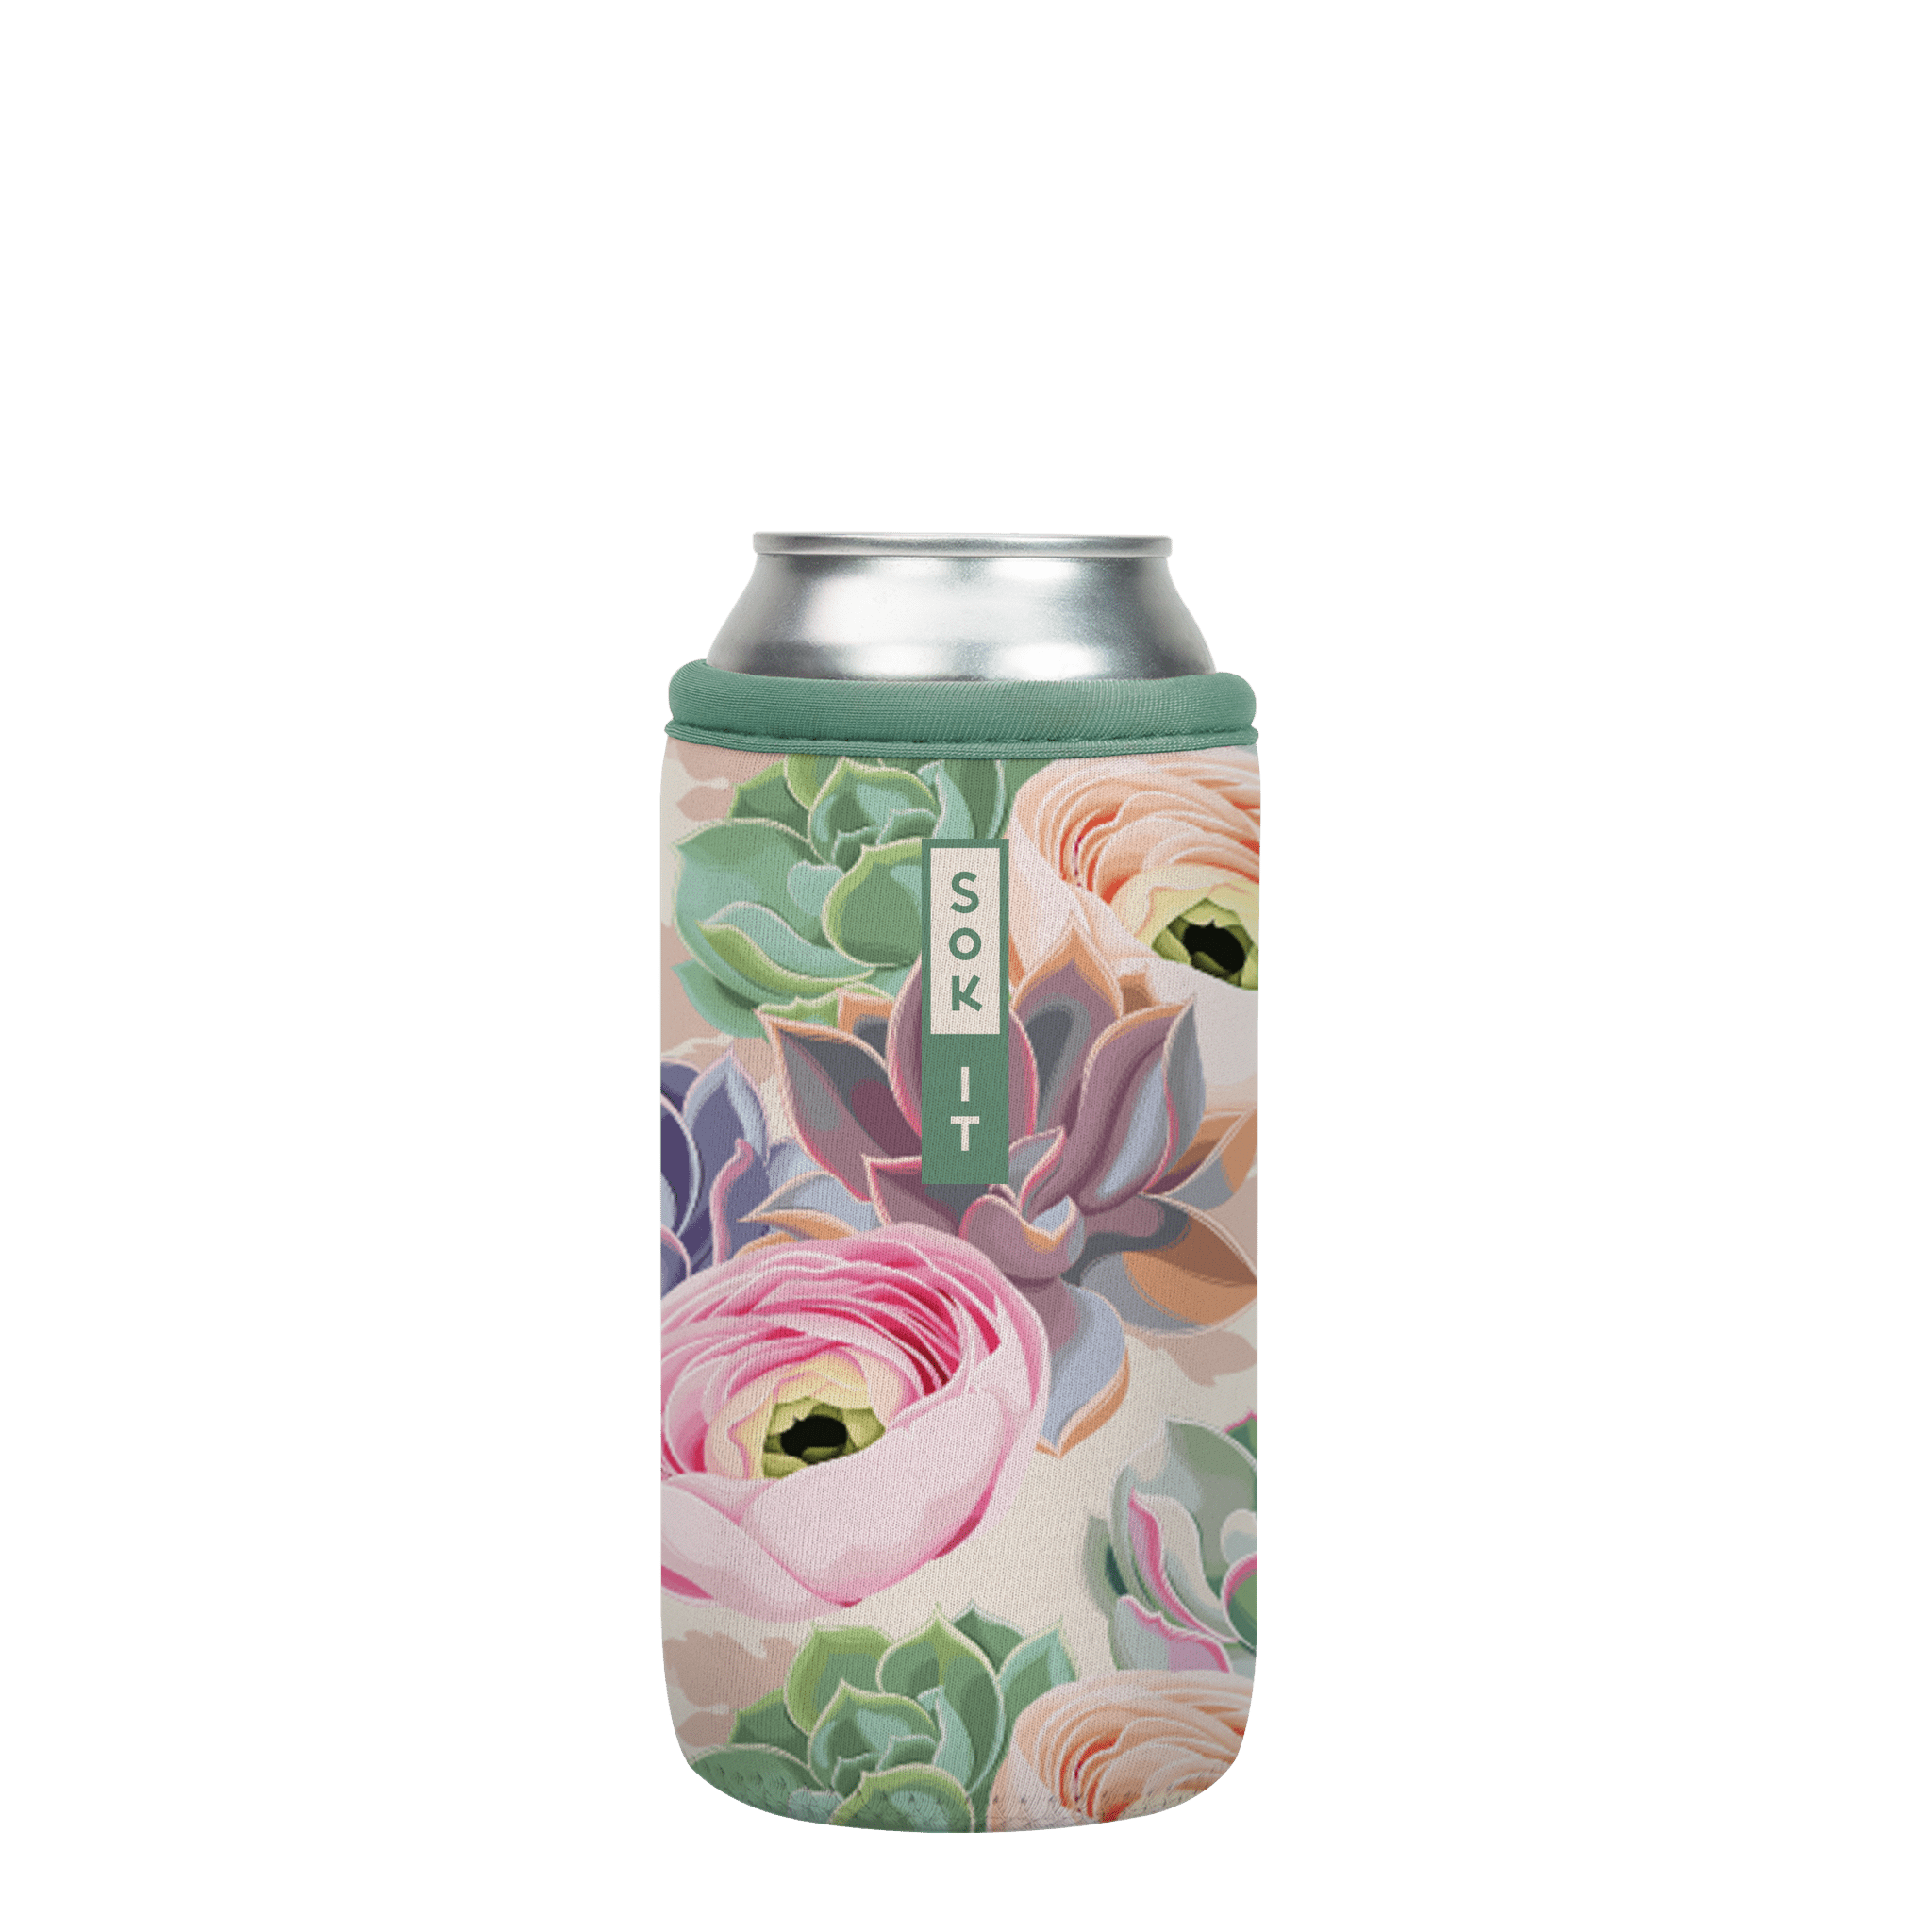 CanSok-Floral 16oz Can 